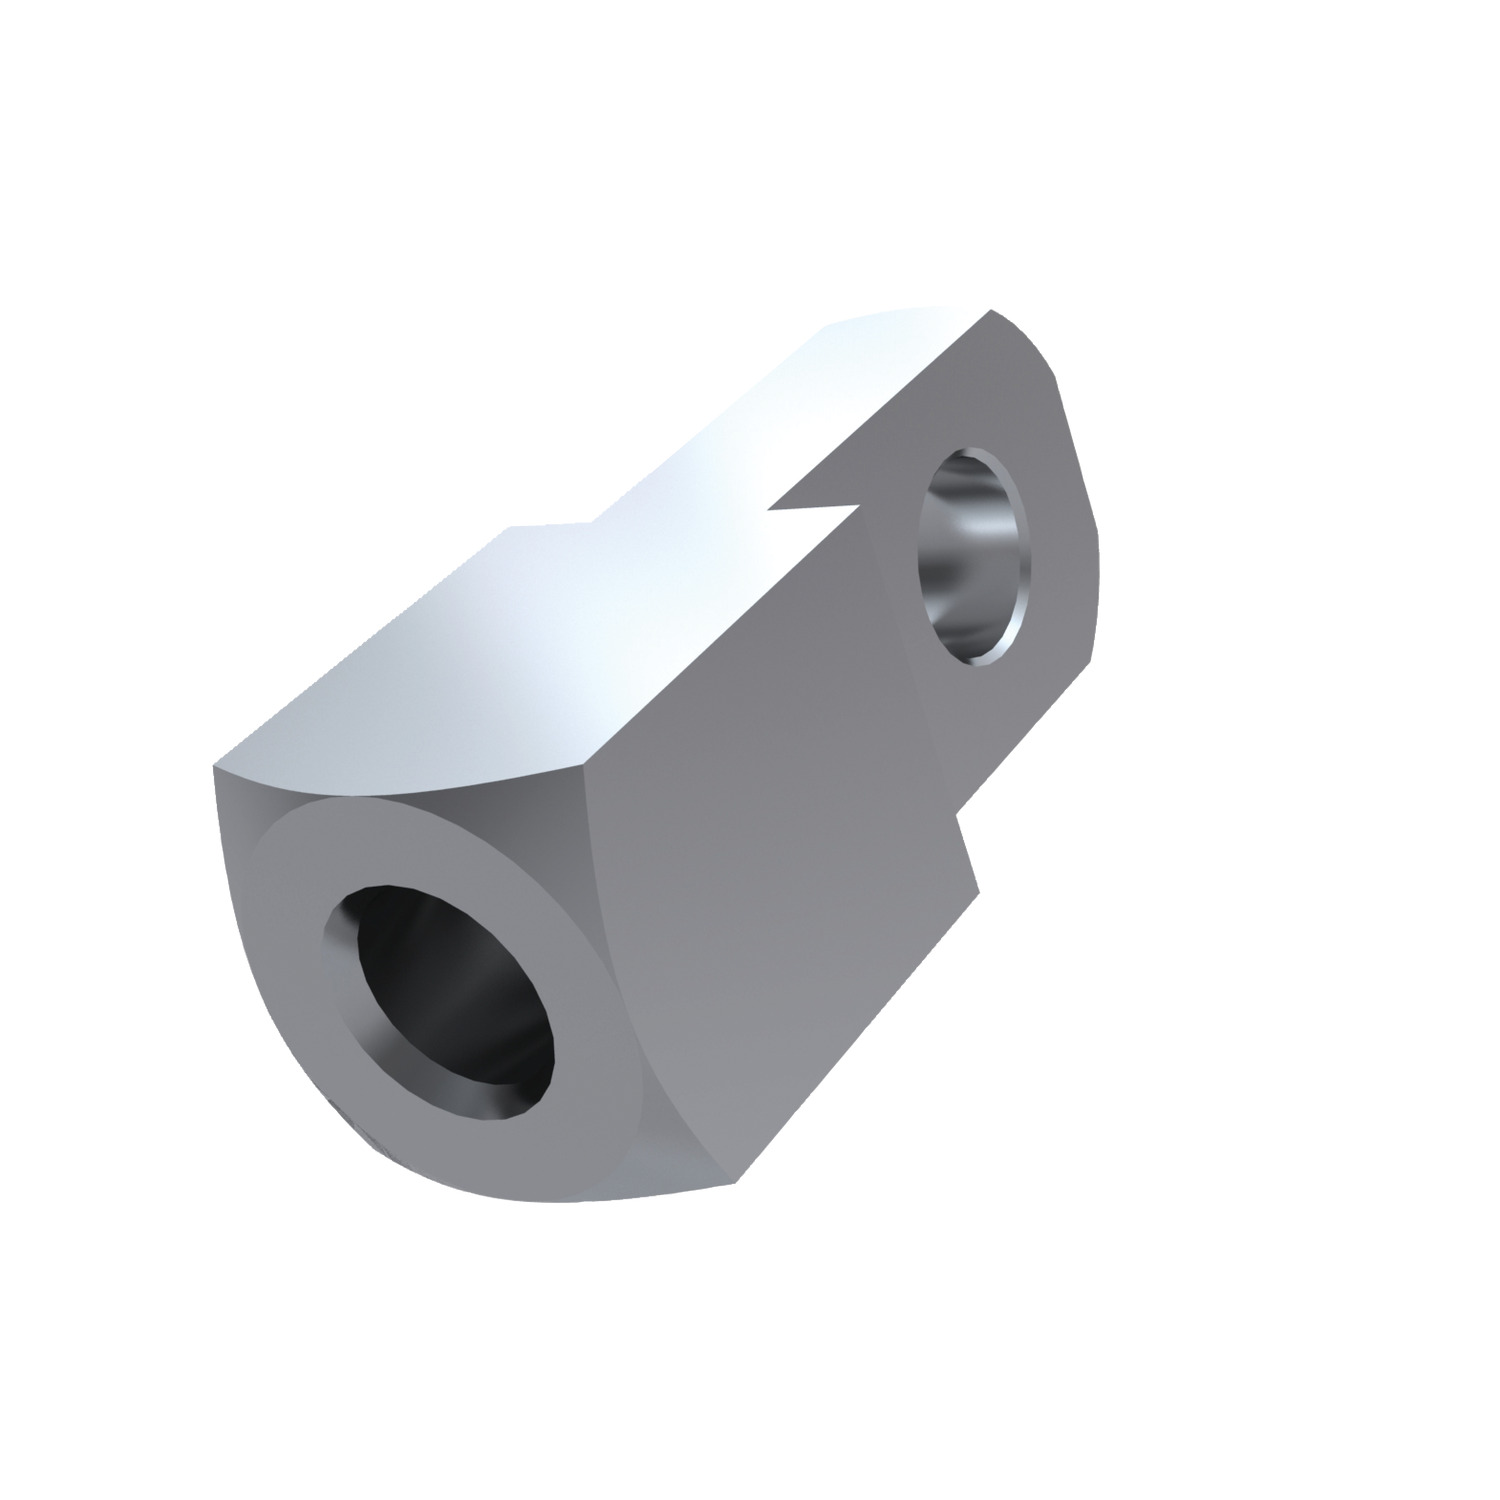 Mating Piece for Clevis Joints Thin end of mating piece is designed to fit in between forks of clevis joint.